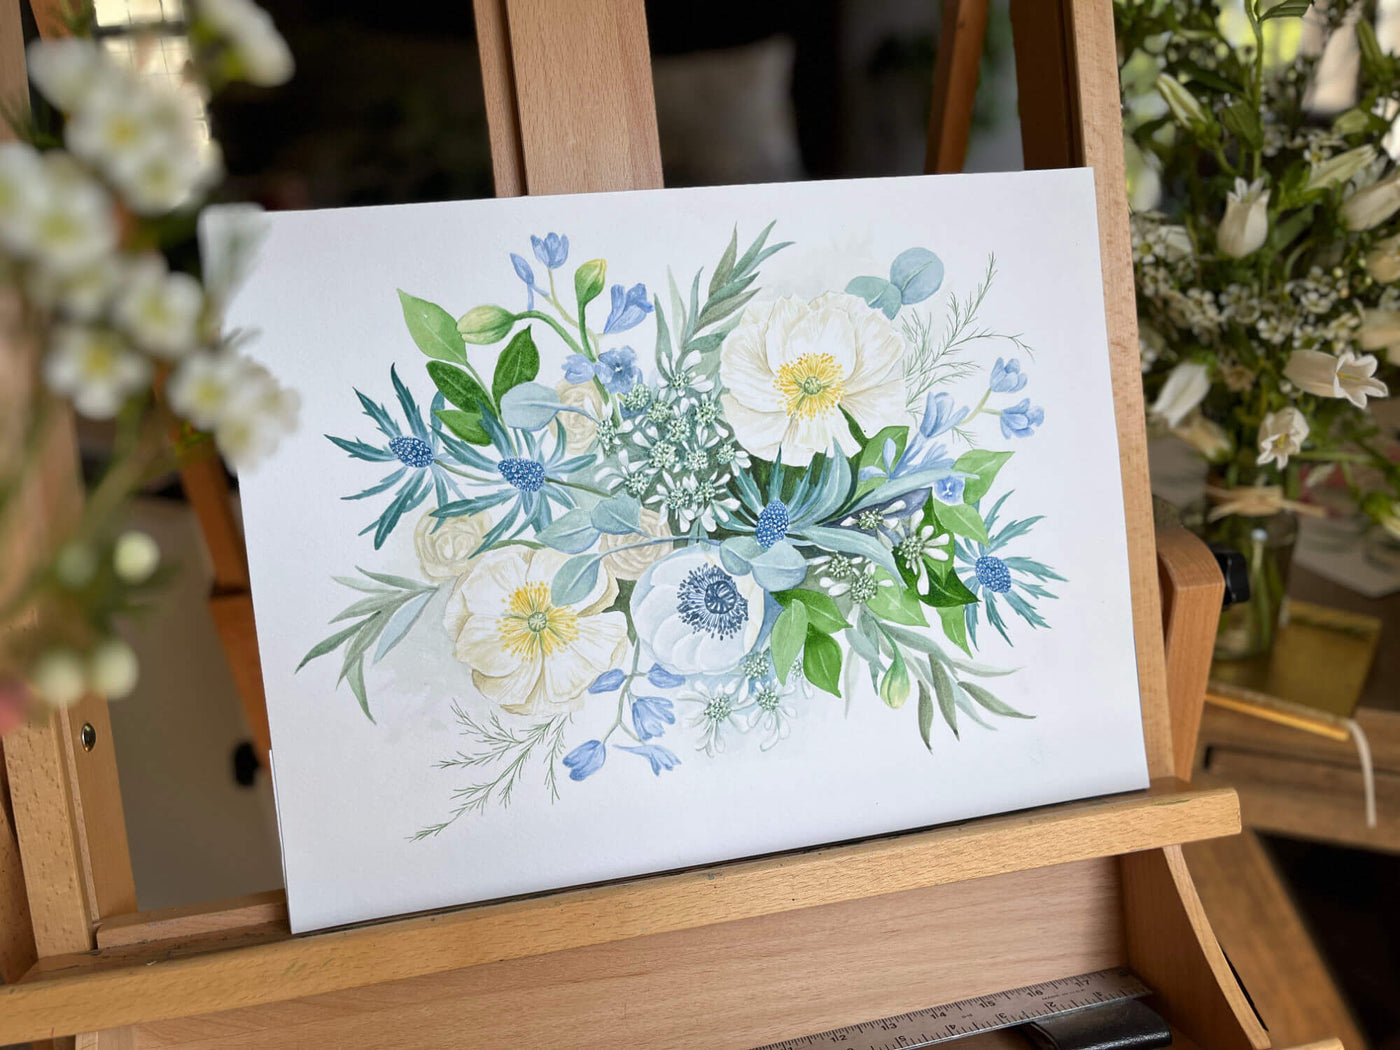 blue wedding bouquet painting on easel with flowers